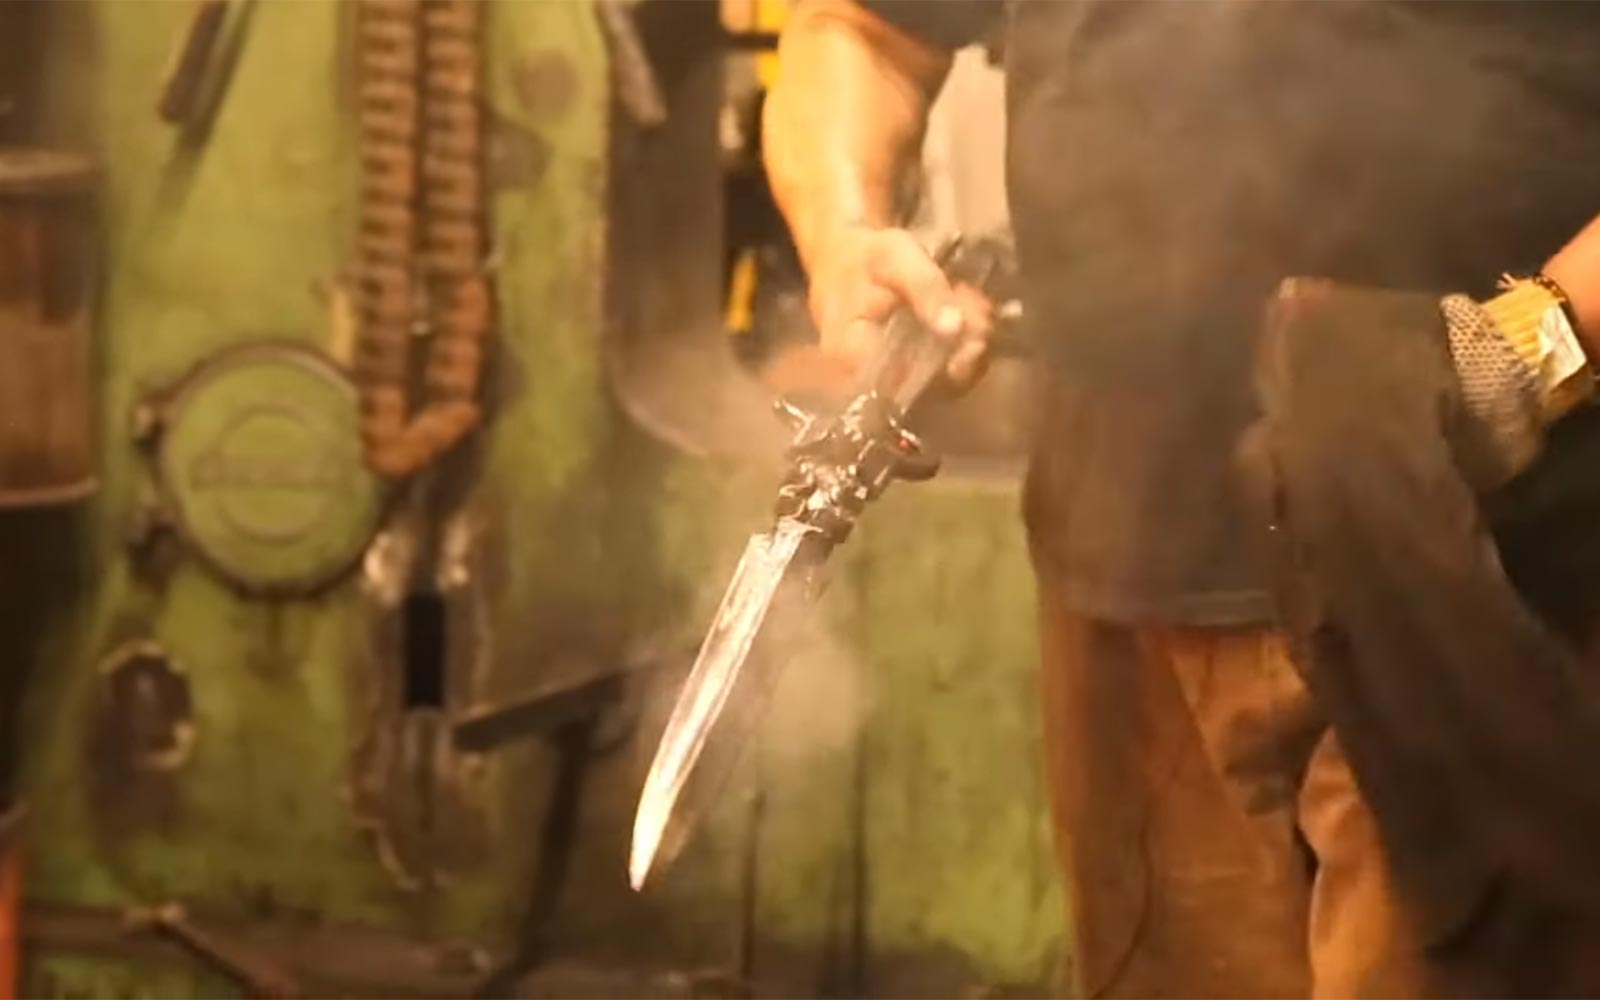 What type of steel is used to make hair cutting shears - Blacksmith Blades